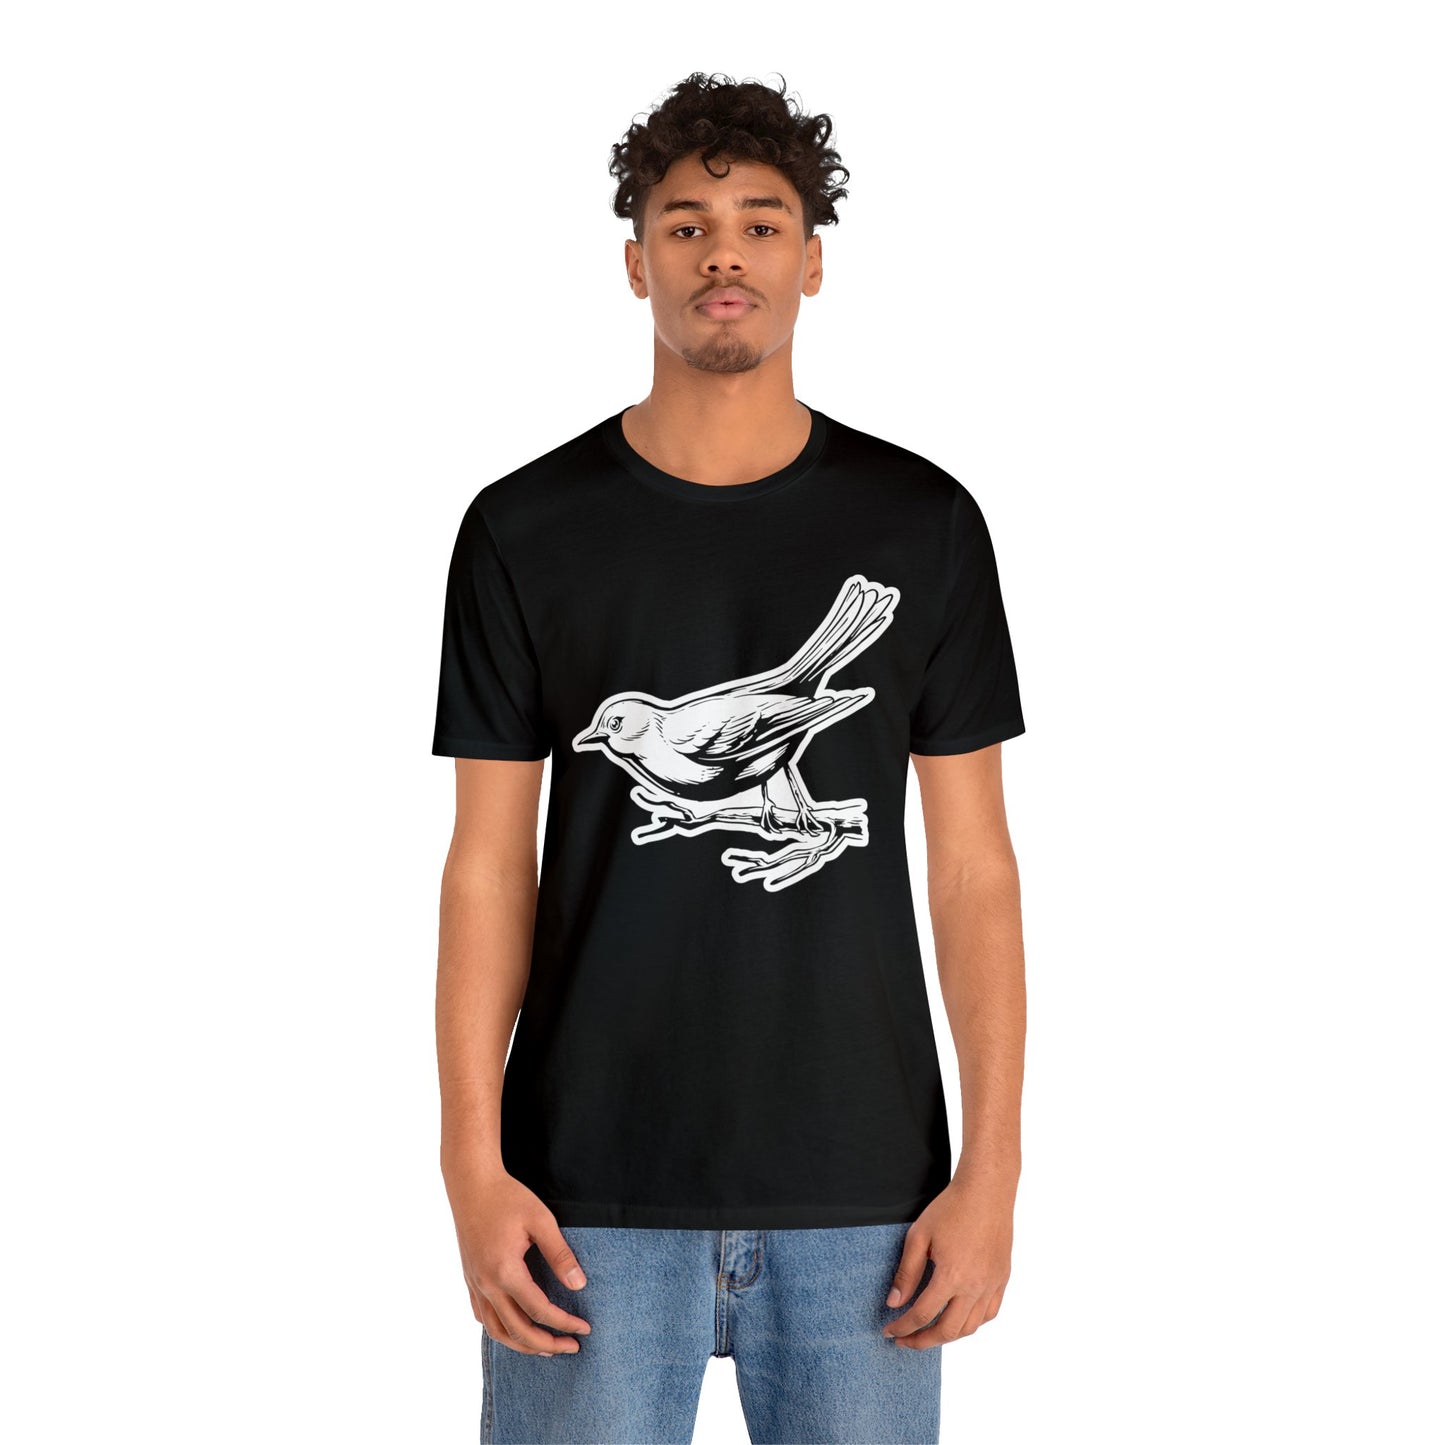 Unique Birds T-Shirt Collection for Nature Lovers